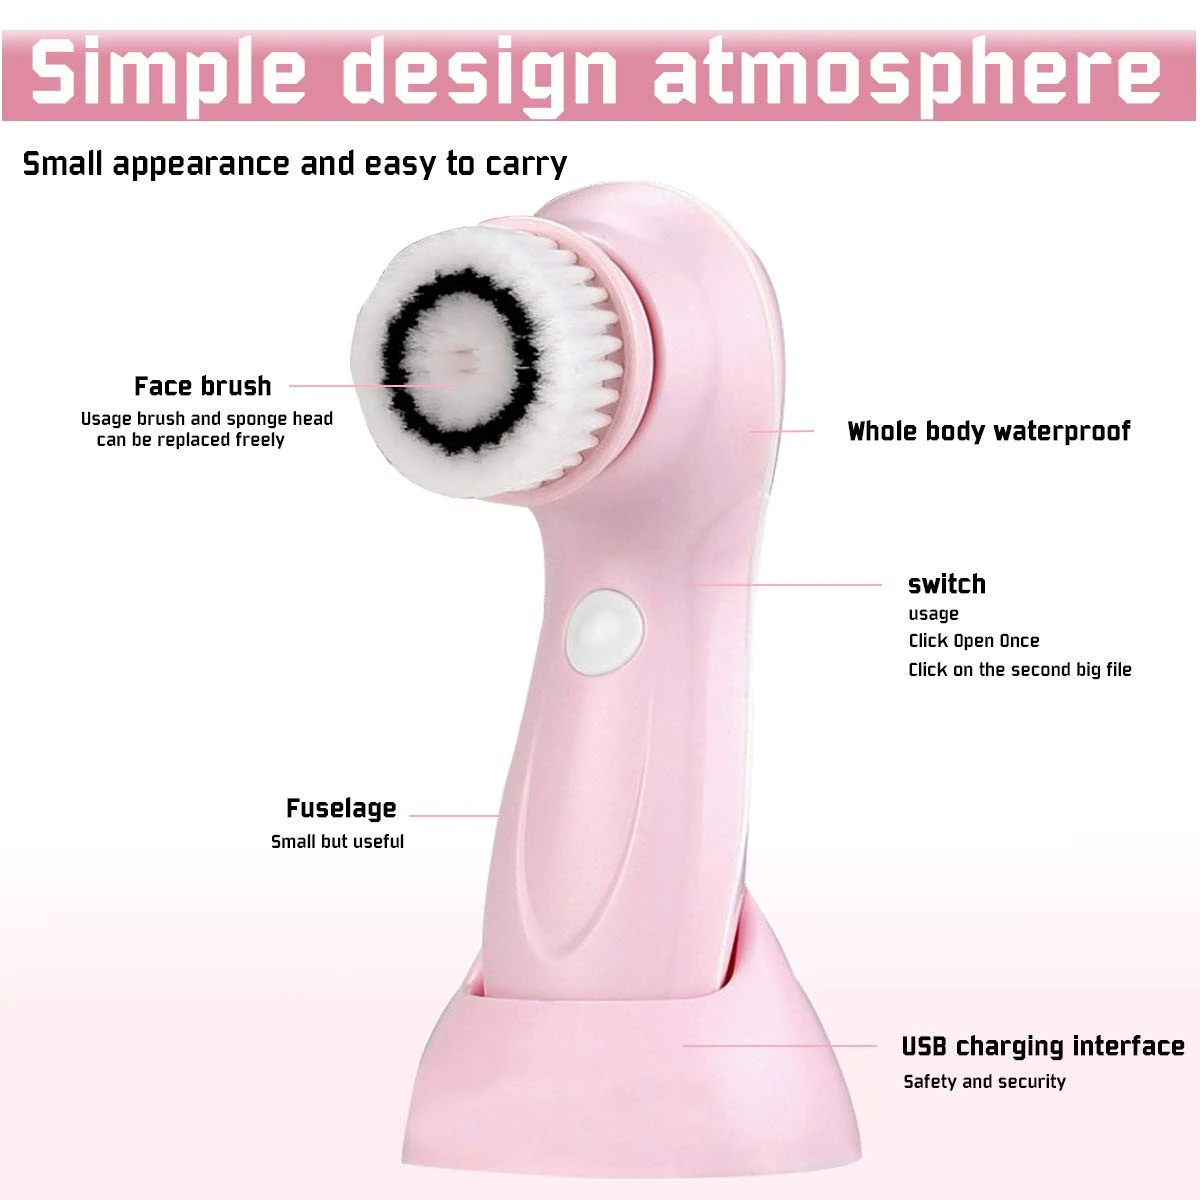 Portable Spin Brush Facial Cleansing Brush Set Deep Exfoliating Silicon Customize Face Brush Electric Silicone Face Cleaner